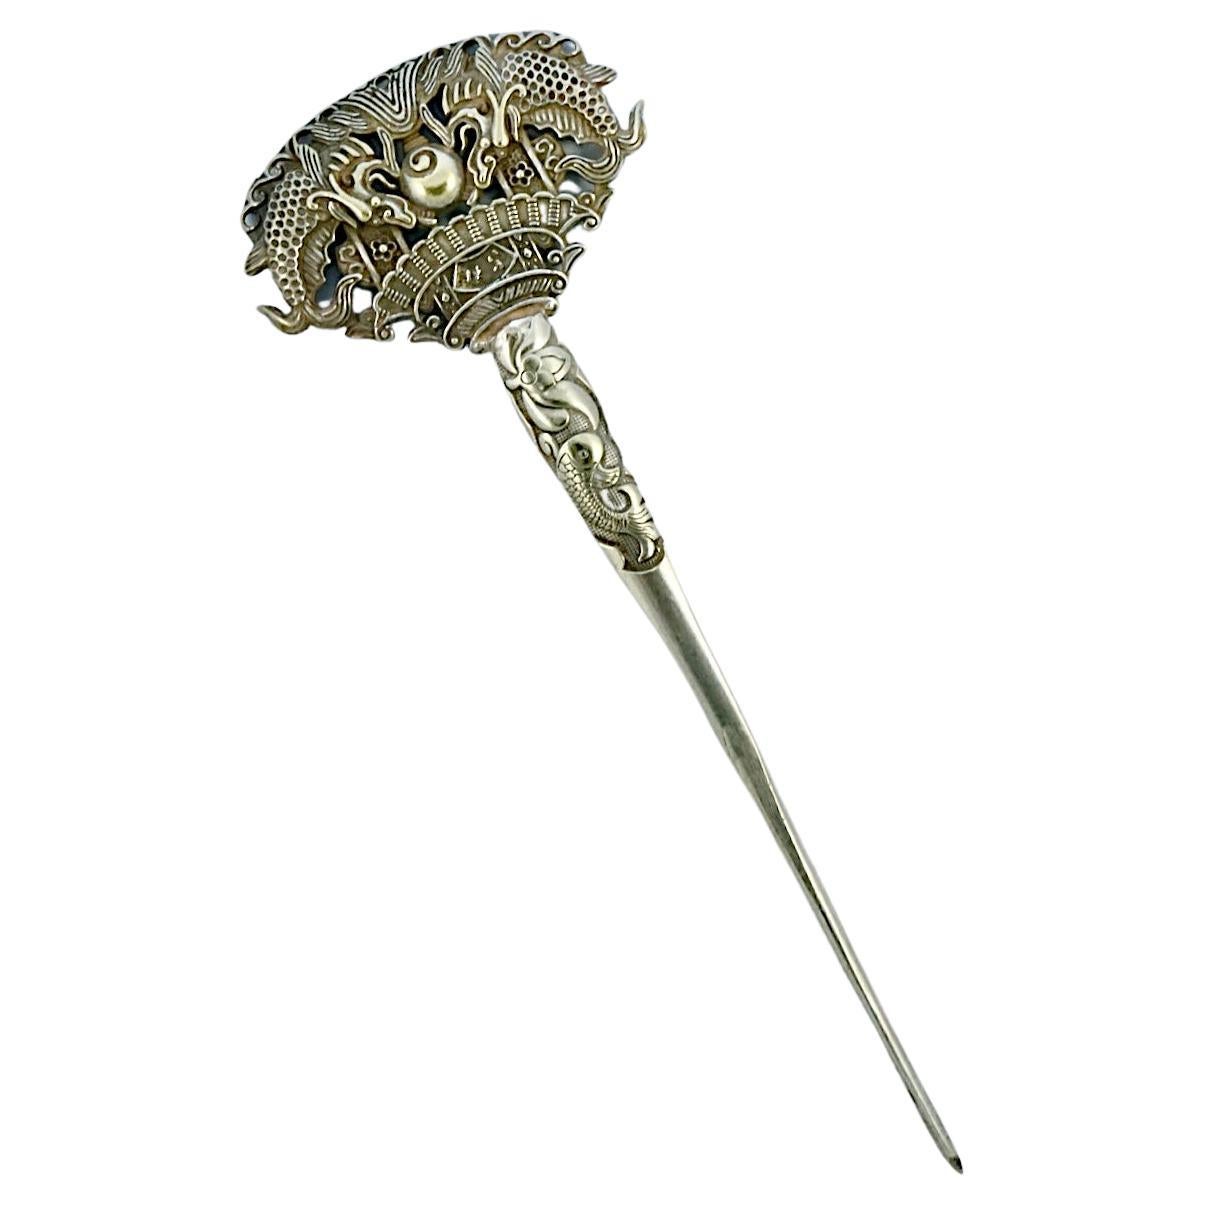 Antique Chinese Silver Tone Hair Pin with Temple Good Luck Koi Carp Blossom